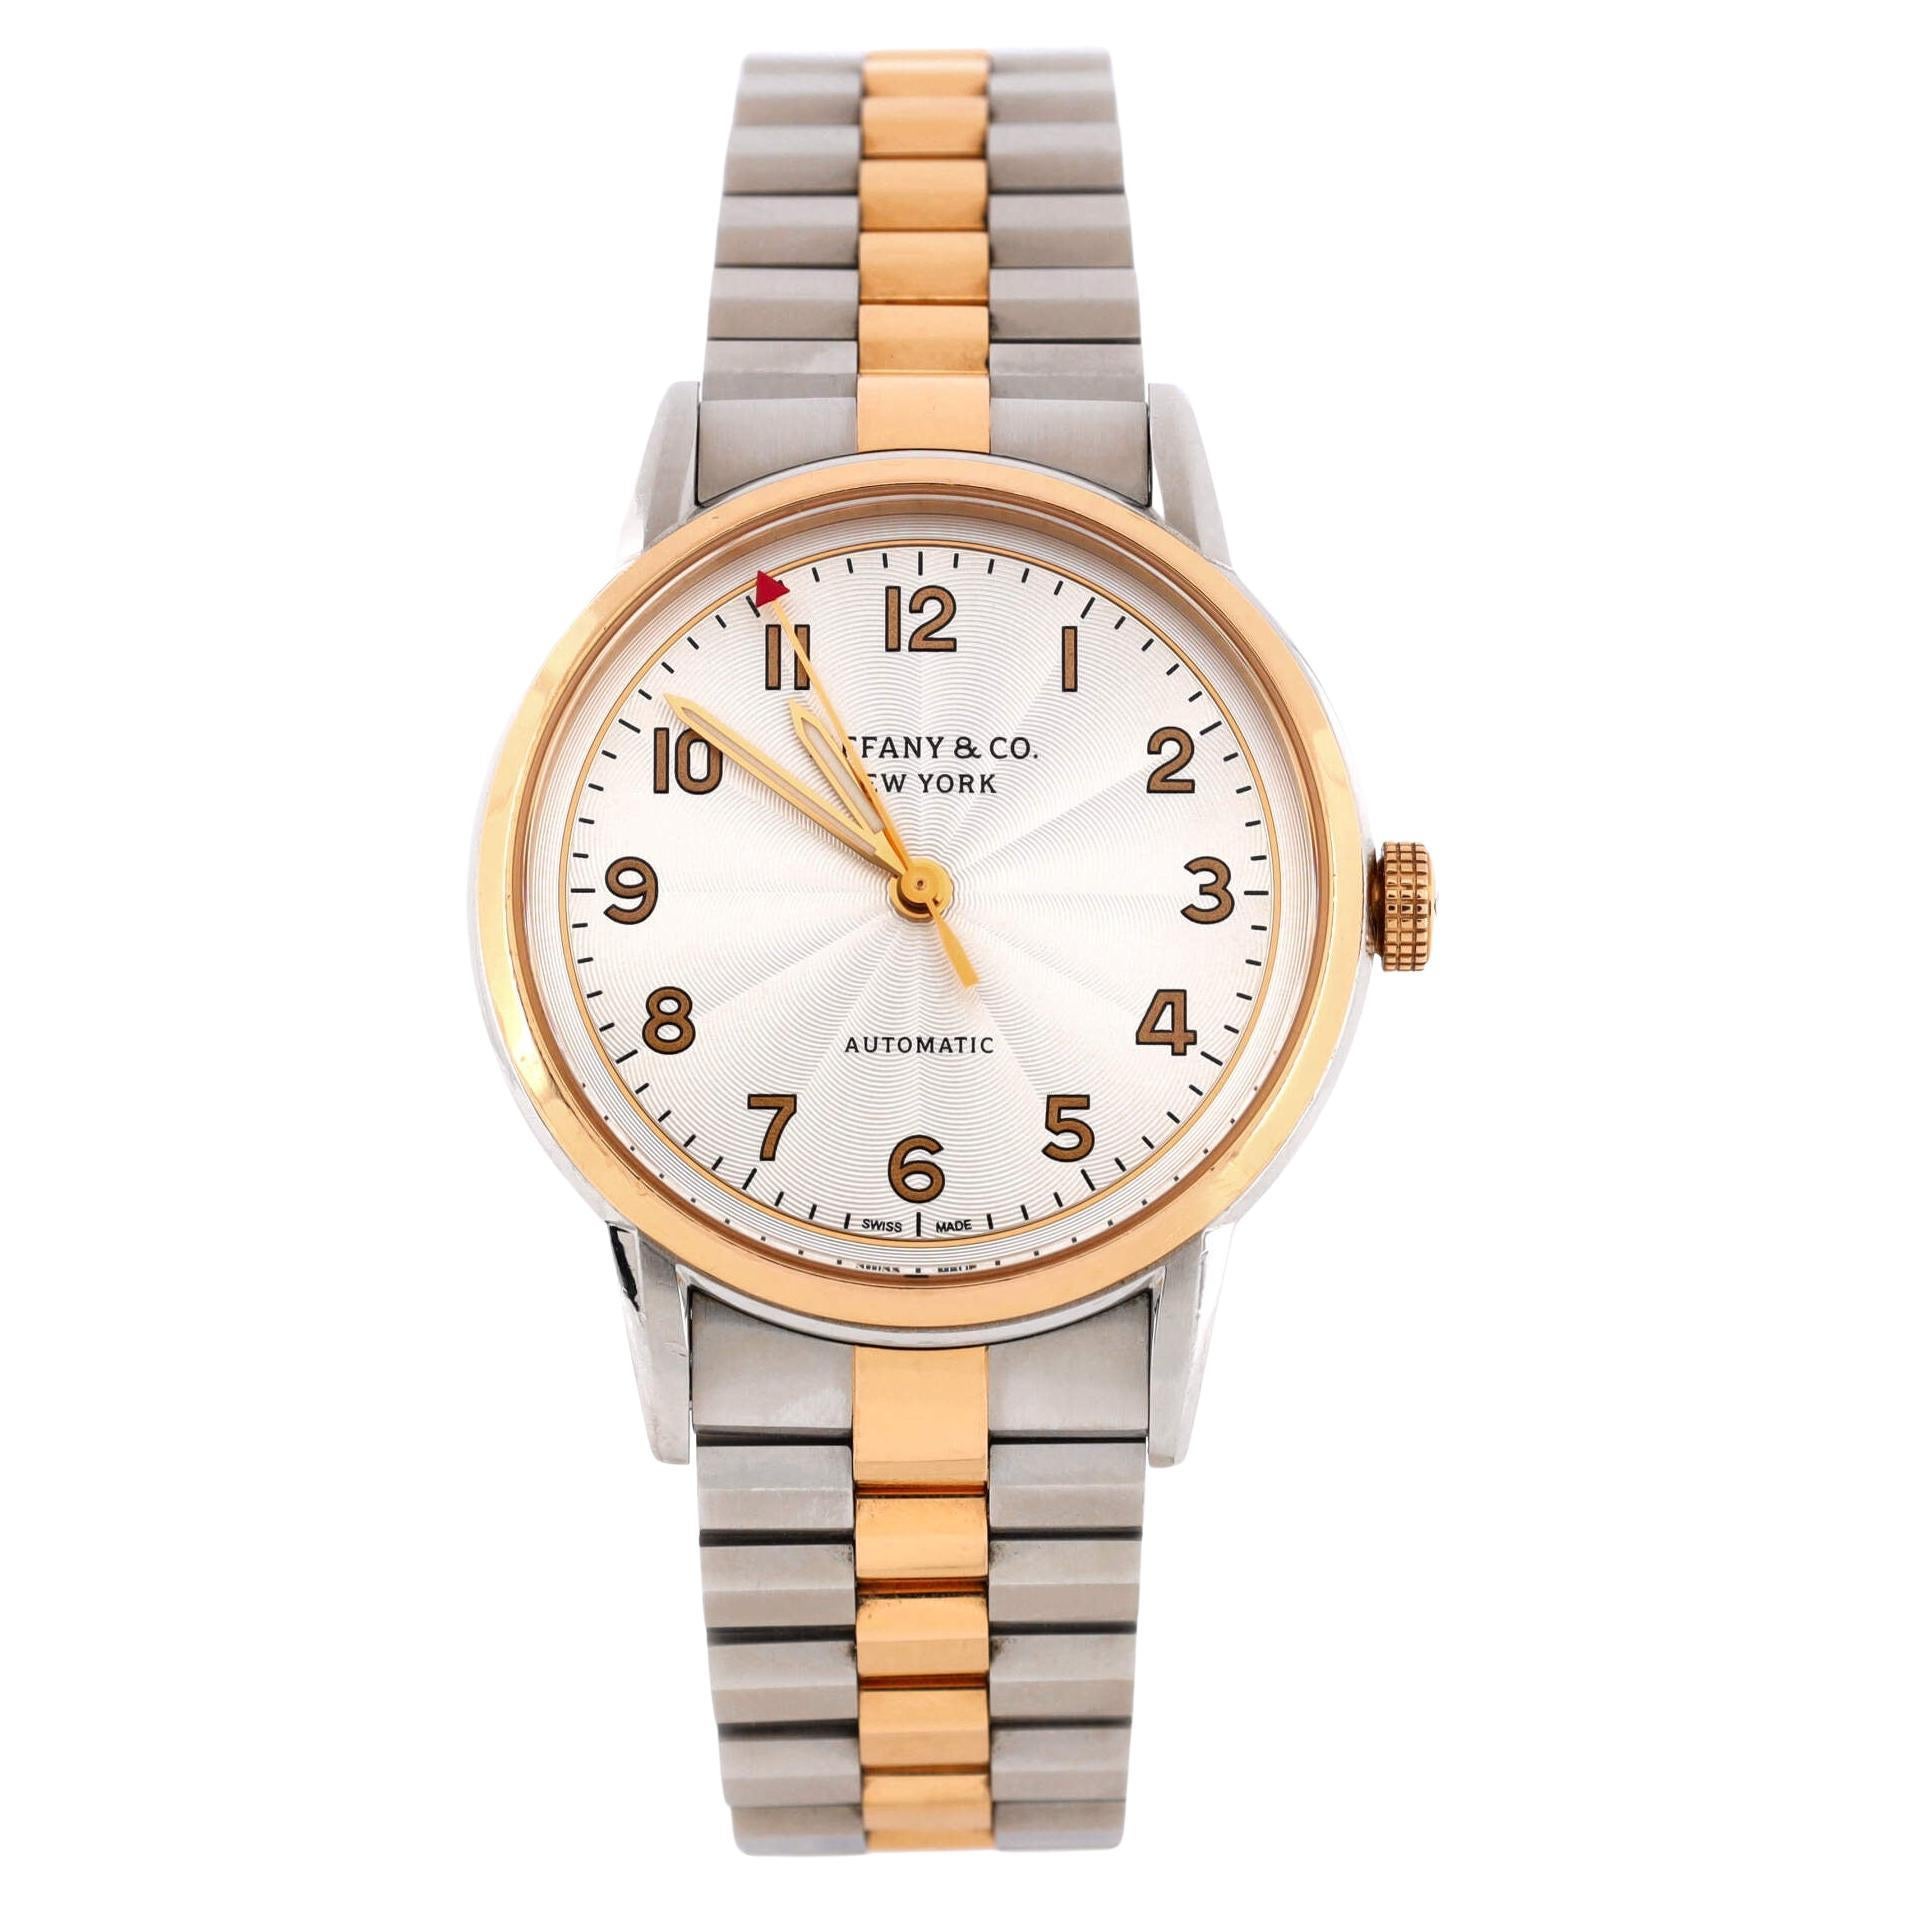 Tiffany & Co. CT60 3-Hand Automatic Watch Stainless Steel and Rose Gold 34